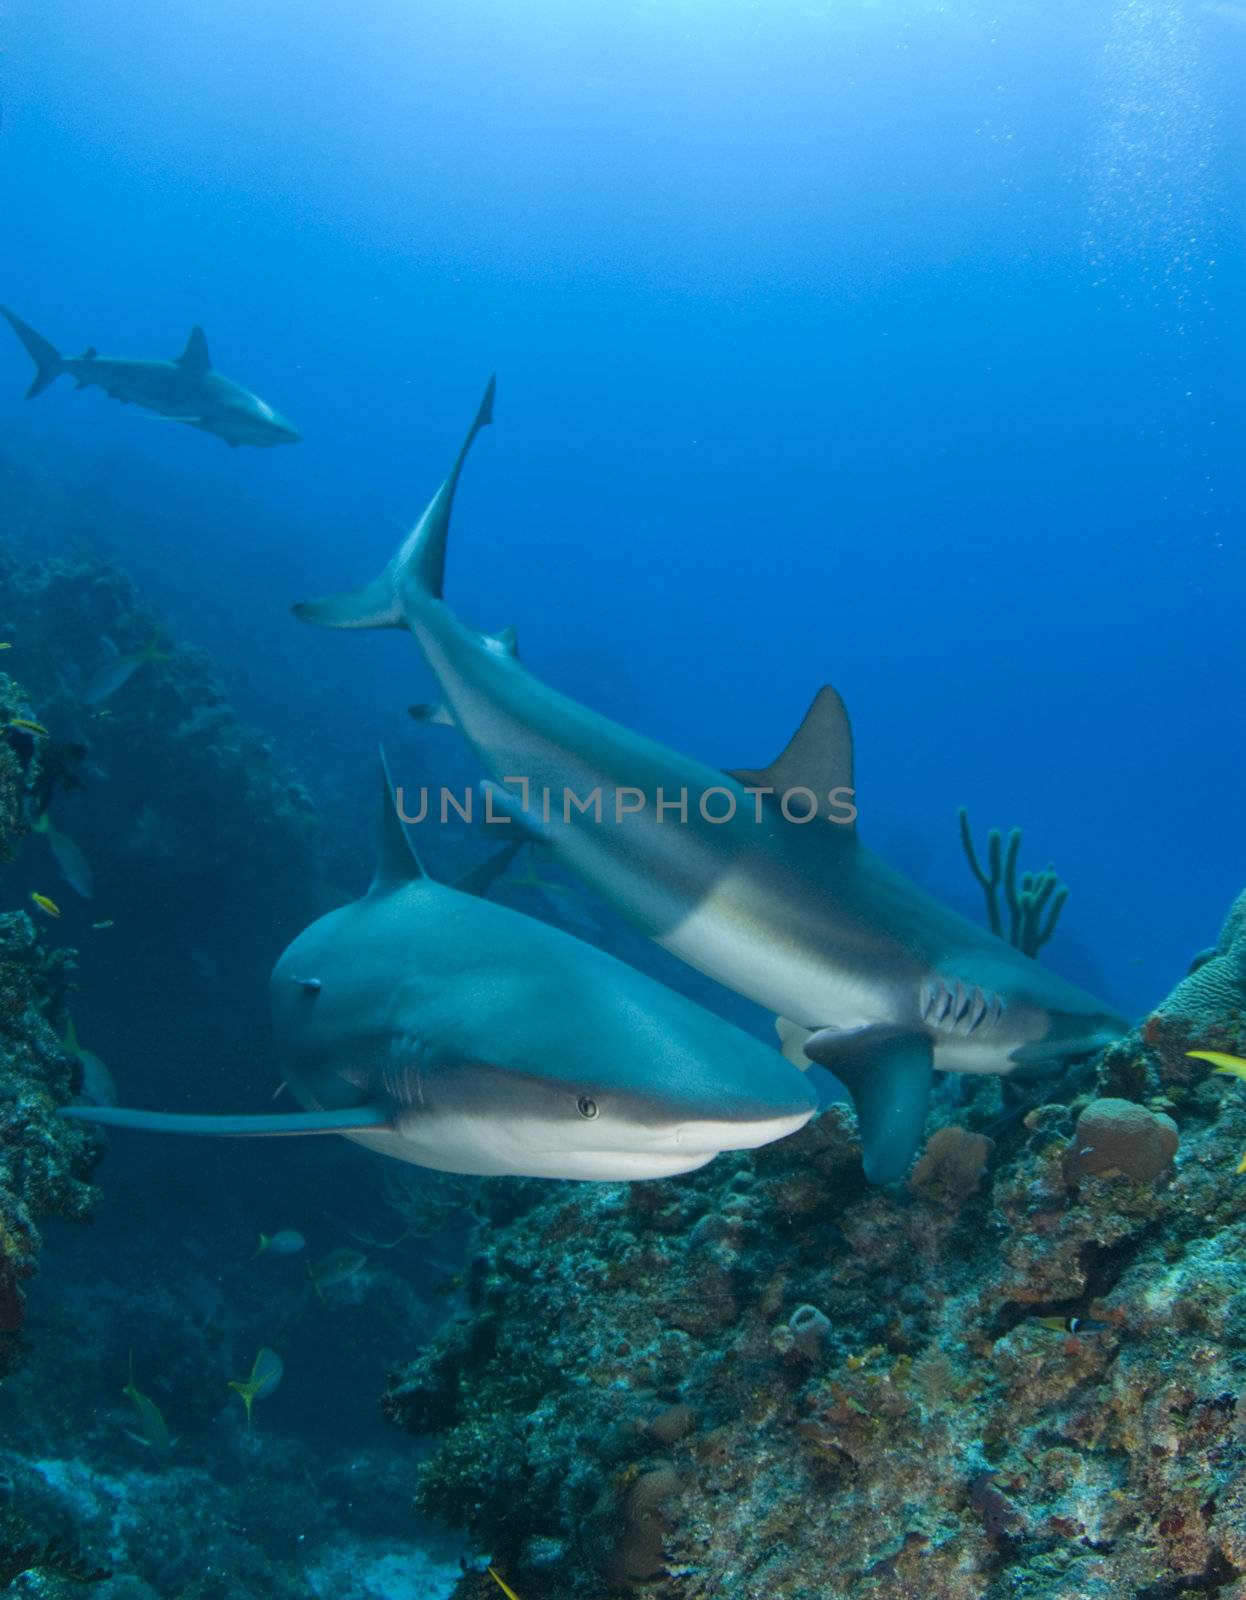 Multiple Reef Sharks On Reef by Naluphoto